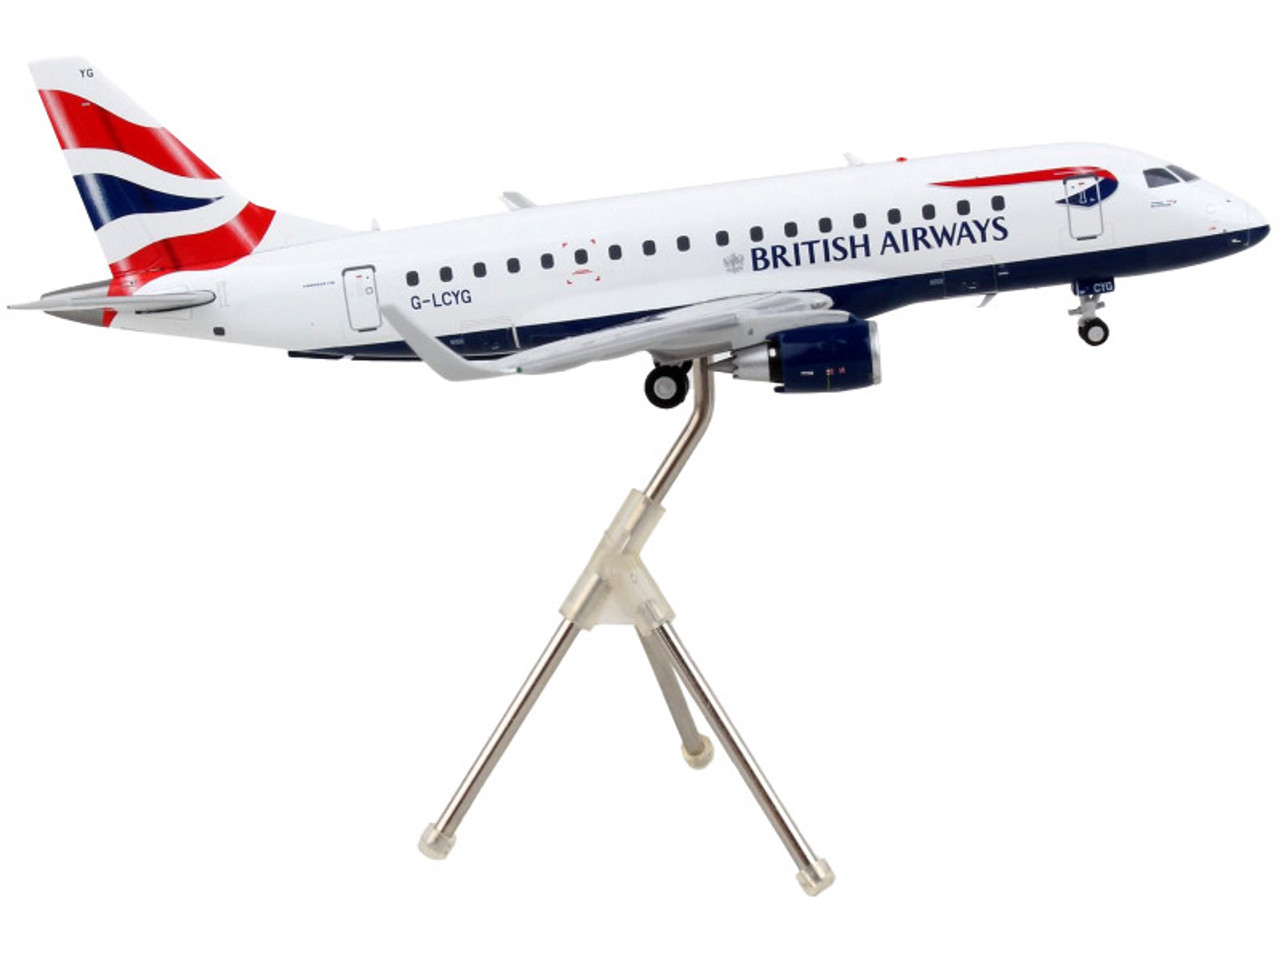 Embraer ERJ-170 Commercial Aircraft "British Airways" White with Striped Tail "Gemini 200" Series 1/200 Diecast Model Airplane by GeminiJets